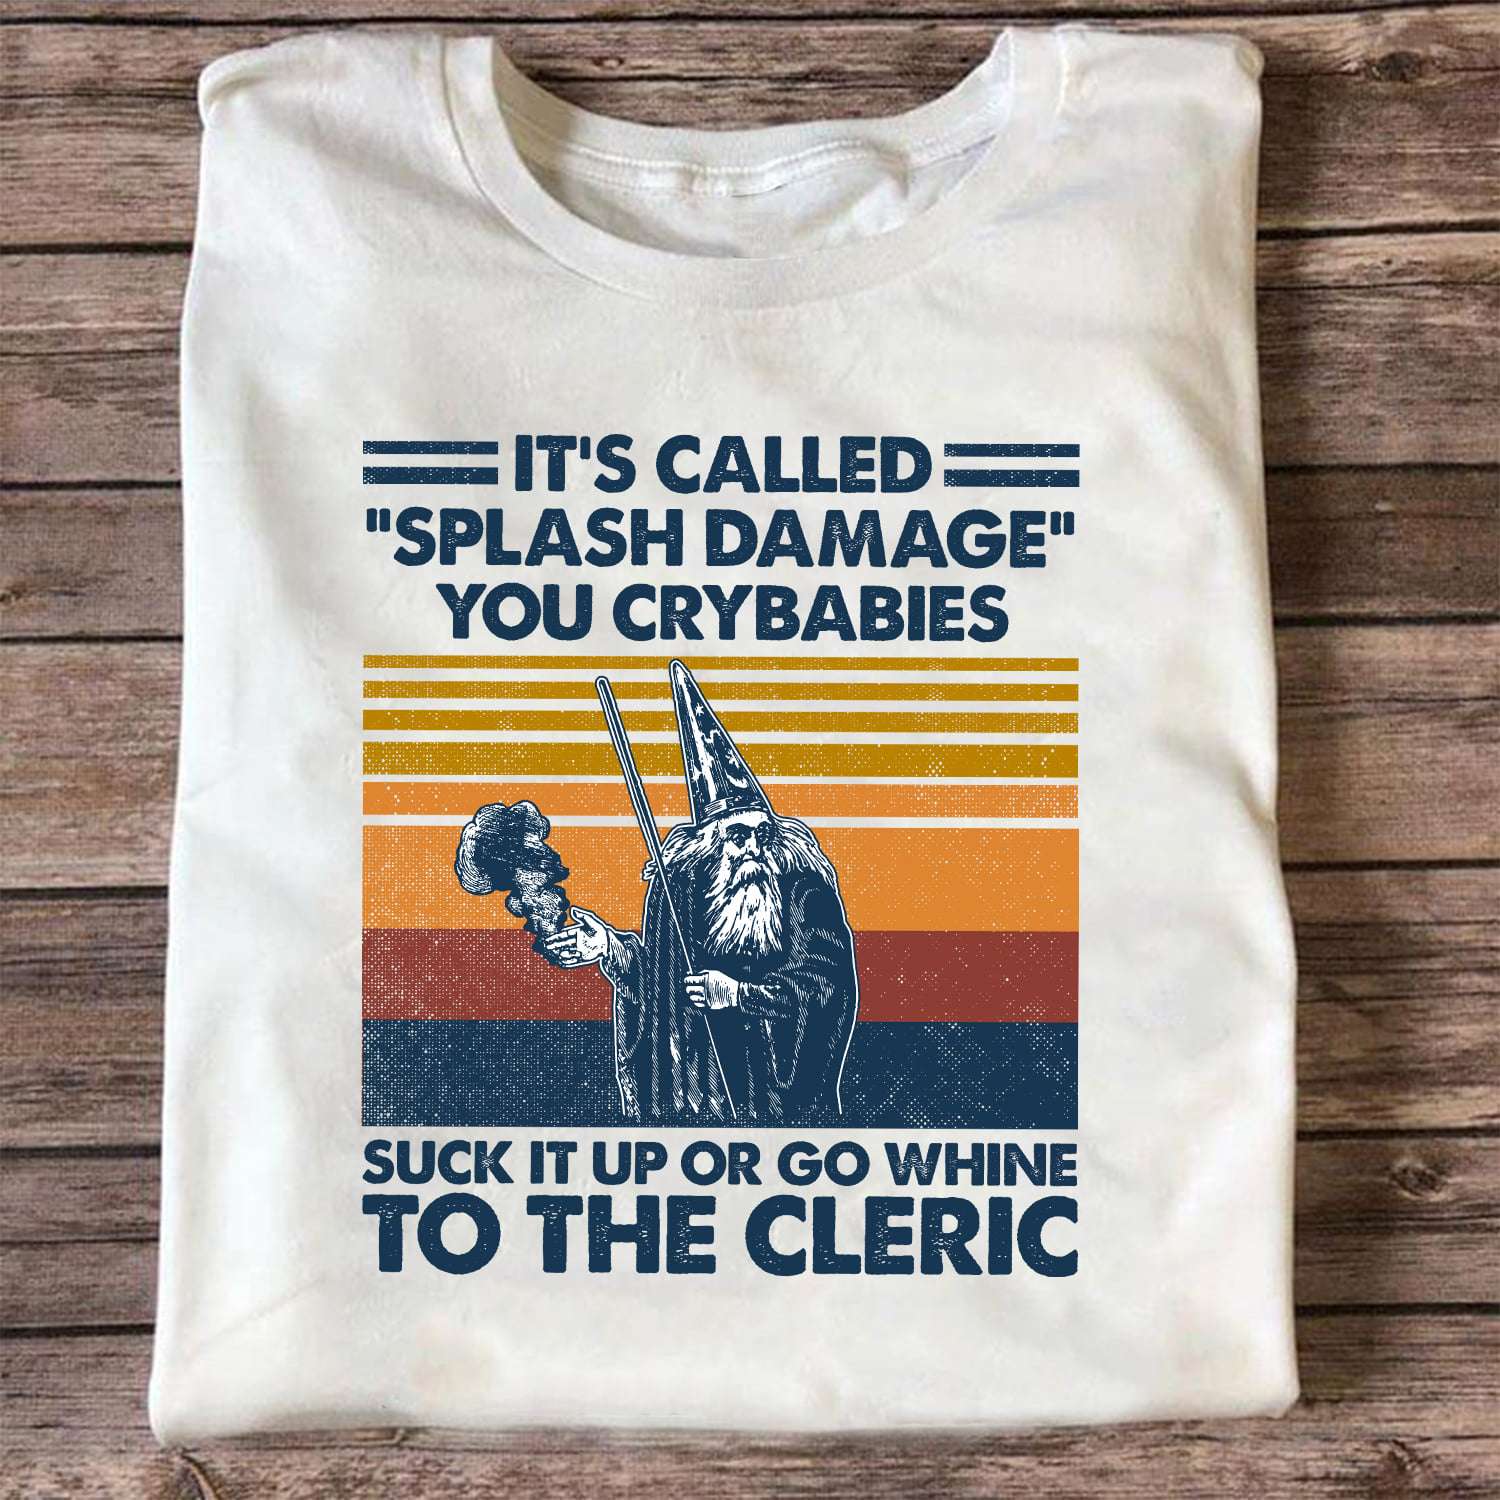 Witch Old Man - It's called splash damage you crybabies suck it up or go whine to the cleric